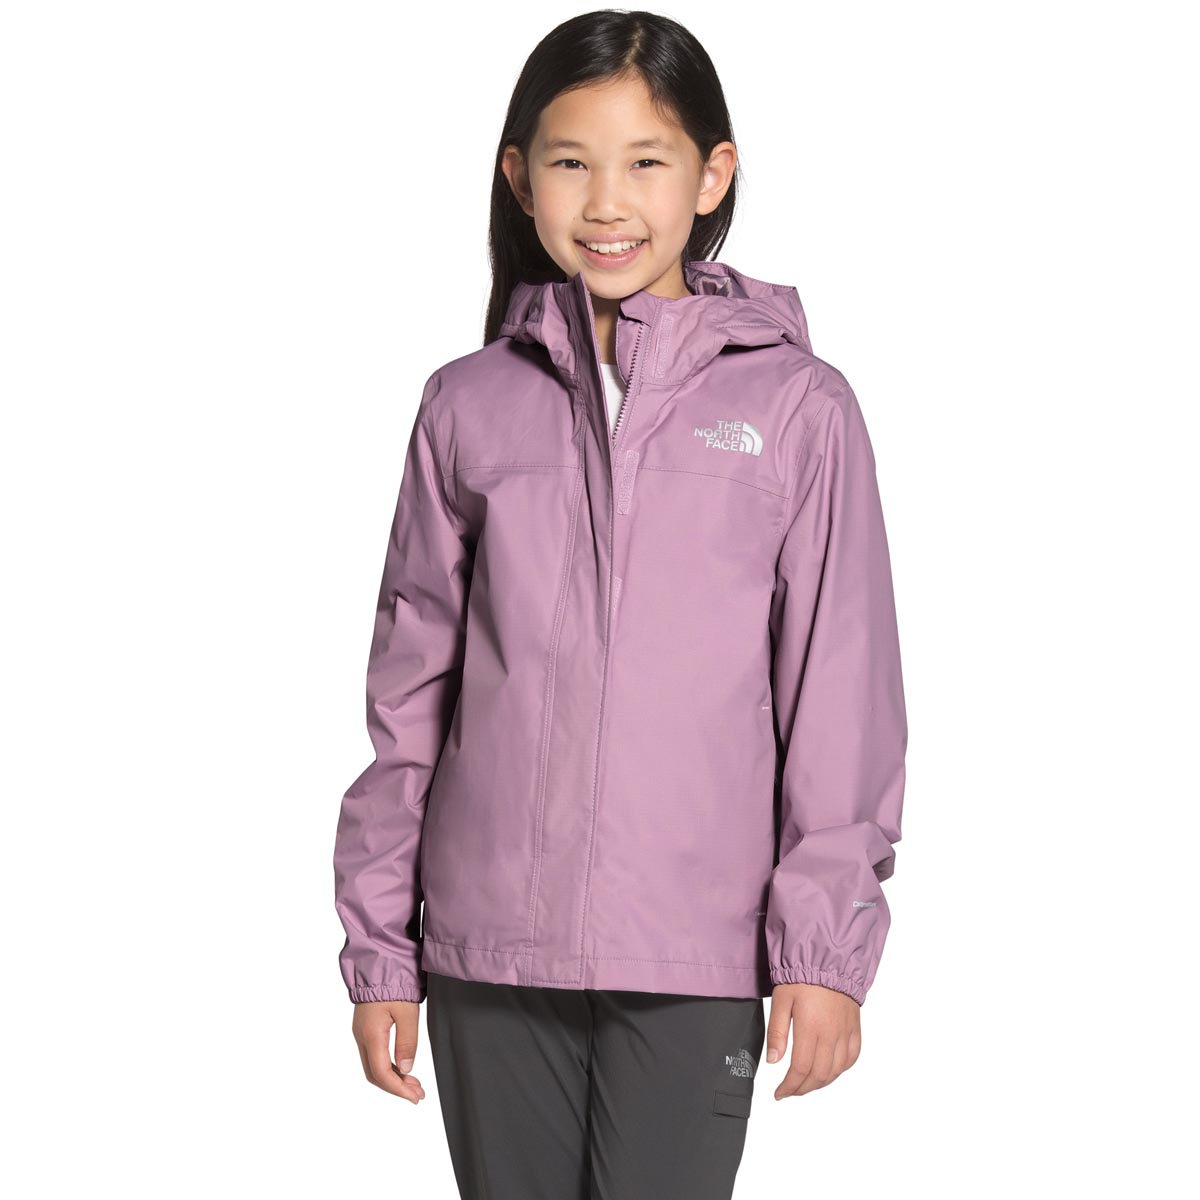 The North Face Girls' Resolve 